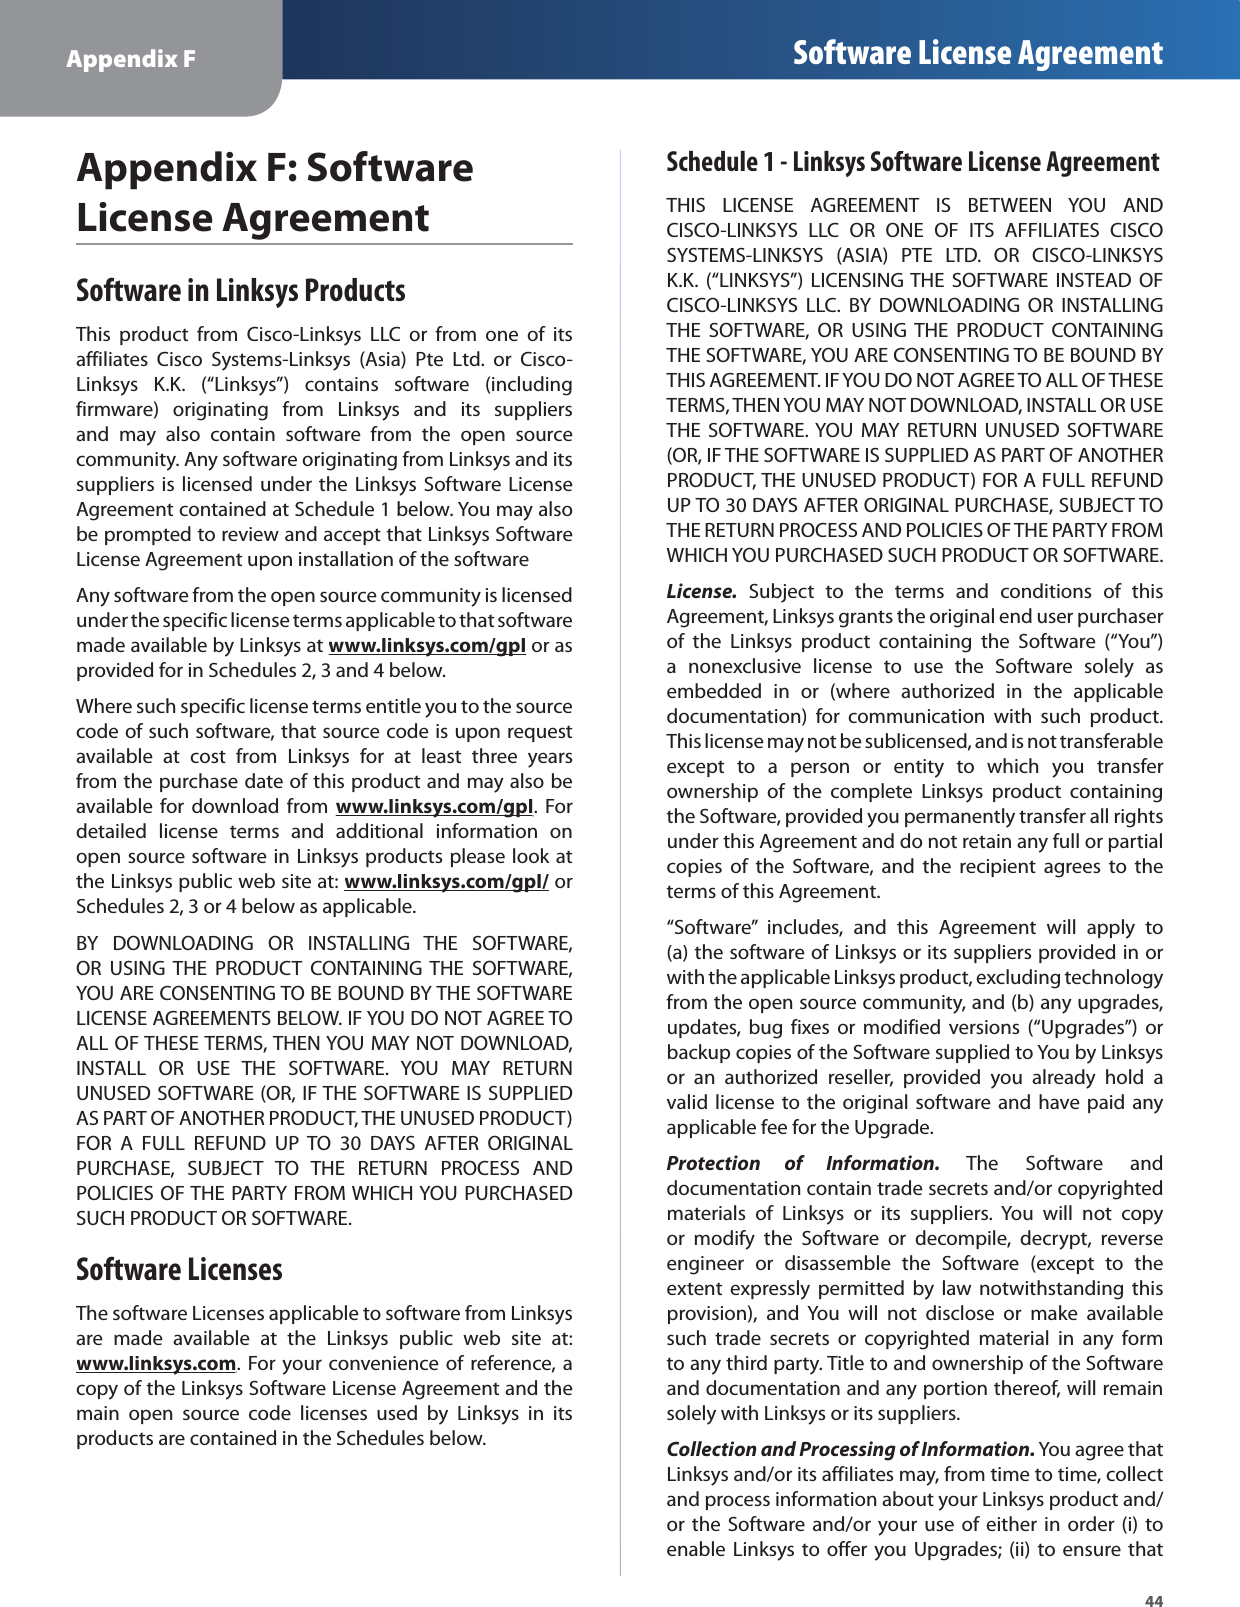 44Appendix F Software License AgreementAppendix F: Software License AgreementSoftware in Linksys ProductsThis product from Cisco-Linksys LLC or from one of itsaffiliates Cisco Systems-Linksys (Asia) Pte Ltd. or Cisco-Linksys K.K. (“Linksys”) contains software (includingfirmware) originating from Linksys and its suppliersand may also contain software from the open sourcecommunity. Any software originating from Linksys and itssuppliers is licensed under the Linksys Software LicenseAgreement contained at Schedule 1 below. You may alsobe prompted to review and accept that Linksys SoftwareLicense Agreement upon installation of the softwareAny software from the open source community is licensedunder the specific license terms applicable to that softwaremade available by Linksys atwww.linksys.com/gplygp or asprovided for in Schedules 2, 3 and 4 below.Where such specific license terms entitle you to the sourcecode of such software, that source code is upon requestavailable at cost from Linksys for at least three yearsfrom the purchase date of this product and may also beavailable for download fromwww.linksys.com/gplygp. Fordetailed license terms and additional information onopen source software in Linksys products please look atthe Linksys public web site at:www.linksys.com/gpl/ygporSchedules 2, 3 or 4 below as applicable.BY DOWNLOADING OR INSTALLING THE SOFTWARE,OR USING THE PRODUCT CONTAINING THE SOFTWARE,YOU ARE CONSENTING TO BE BOUND BY THE SOFTWARELICENSE AGREEMENTS BELOW. IF YOU DO NOT AGREE TOALL OF THESE TERMS, THEN YOU MAY NOT DOWNLOAD,INSTALL OR USE THE SOFTWARE. YOU MAY RETURNUNUSED SOFTWARE (OR, IF THE SOFTWARE IS SUPPLIEDAS PART OF ANOTHER PRODUCT, THE UNUSED PRODUCT)FOR A FULL REFUND UP TO 30 DAYS AFTER ORIGINALPURCHASE, SUBJECT TO THE RETURN PROCESS ANDPOLICIES OF THE PARTY FROM WHICH YOU PURCHASEDSUCH PRODUCT OR SOFTWARE.Software LicensesThe software Licenses applicable to software from Linksysare made available at the Linksys public web site at:www.linksys.comy. For your convenience of reference, acopy of the Linksys Software License Agreement and themain open source code licenses used by Linksys in itsproducts are contained in the Schedules below.Schedule 1 - Linksys Software License AgreementTHIS LICENSE AGREEMENT IS BETWEEN YOU ANDCISCO-LINKSYS LLC OR ONE OF ITS AFFILIATES CISCOSYSTEMS-LINKSYS (ASIA) PTE LTD. OR CISCO-LINKSYSK.K. (“LINKSYS”) LICENSING THE SOFTWARE INSTEAD OFCISCO-LINKSYS LLC. BY DOWNLOADING OR INSTALLINGTHE SOFTWARE, OR USING THE PRODUCT CONTAININGTHE SOFTWARE, YOU ARE CONSENTING TO BE BOUND BYTHIS AGREEMENT. IF YOU DO NOT AGREE TO ALL OF THESETERMS, THEN YOU MAY NOT DOWNLOAD, INSTALL OR USETHE SOFTWARE. YOU MAY RETURN UNUSED SOFTWARE(OR, IF THE SOFTWARE IS SUPPLIED AS PART OF ANOTHERPRODUCT, THE UNUSED PRODUCT) FOR A FULL REFUNDUP TO 30 DAYS AFTER ORIGINAL PURCHASE, SUBJECT TOTHE RETURN PROCESS AND POLICIES OF THE PARTY FROMWHICH YOU PURCHASED SUCH PRODUCT OR SOFTWARE.License.Subject to the terms and conditions of thisAgreement, Linksys grants the original end user purchaserof the Linksys product containing the Software (“You”)a nonexclusive license to use the Software solely asembedded in or (where authorized in the applicabledocumentation) for communication with such product.This license may not be sublicensed, and is not transferableexcept to a person or entity to which you transferownership of the complete Linksys product containingthe Software, provided you permanently transfer all rightsunder this Agreement and do not retain any full or partialcopies of the Software, and the recipient agrees to theterms of this Agreement.“Software” includes, and this Agreement will apply to(a)the software of Linksys or its suppliers provided in orwith the applicable Linksys product, excluding technologyfrom the open source community, and (b) any upgrades,updates, bug fixes or modified versions (“Upgrades”) orbackup copies of the Software supplied to You by Linksysor an authorized reseller, provided you already hold avalid license to the original software and have paid anyapplicable fee for the Upgrade.Protection of Information. The Software anddocumentation contain trade secrets and/or copyrightedmaterials of Linksys or its suppliers. You will not copyor modify the Software or decompile, decrypt, reverseengineer or disassemble the Software (except to theextent expressly permitted by law notwithstanding thisprovision), and You will not disclose or make availablesuch trade secrets or copyrighted material in any formto any third party. Title to and ownership of the Softwareand documentation and any portion thereof, will remainsolely with Linksys or its suppliers.Collection and Processing of Information. You agree thatLinksys and/or its affiliates may, from time to time, collectand process information about your Linksys product and/or the Software and/or your use of either in order (i) toenable Linksys to offer you Upgrades; (ii) to ensure that